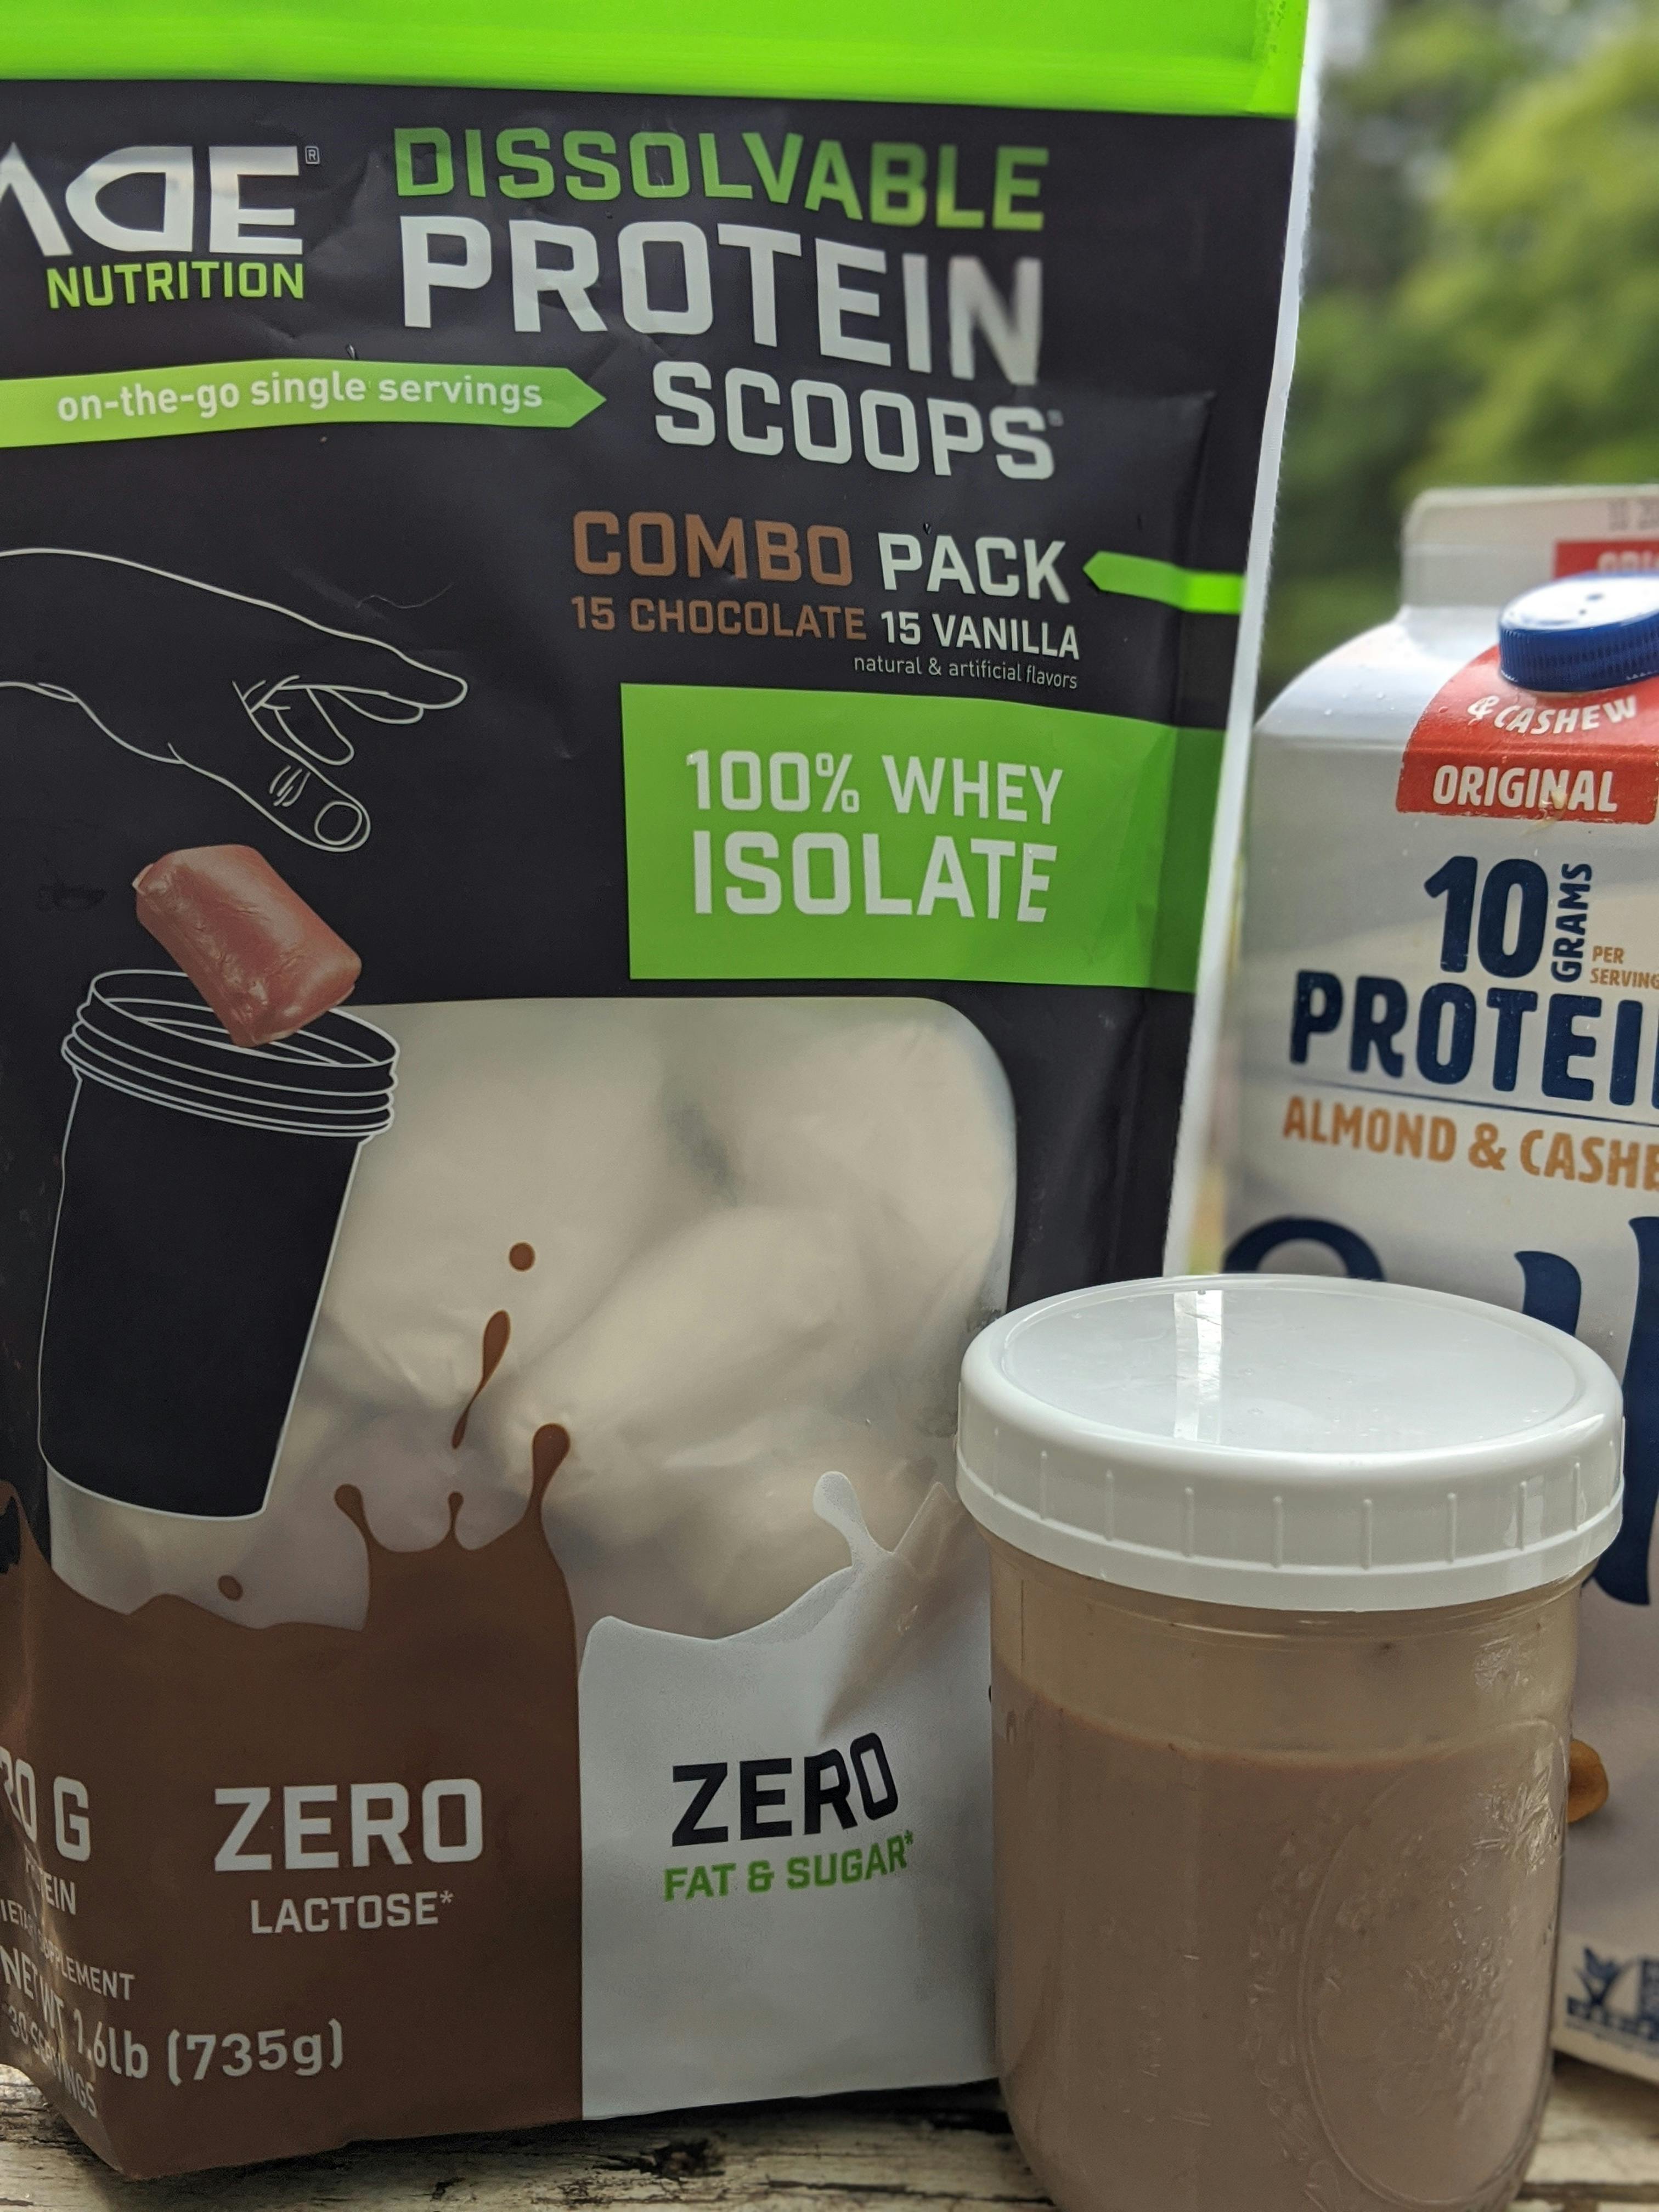 VADE Nutrition Dissolvable Protein Scoops Review (2019 Update) Read This  BEFORE Buying